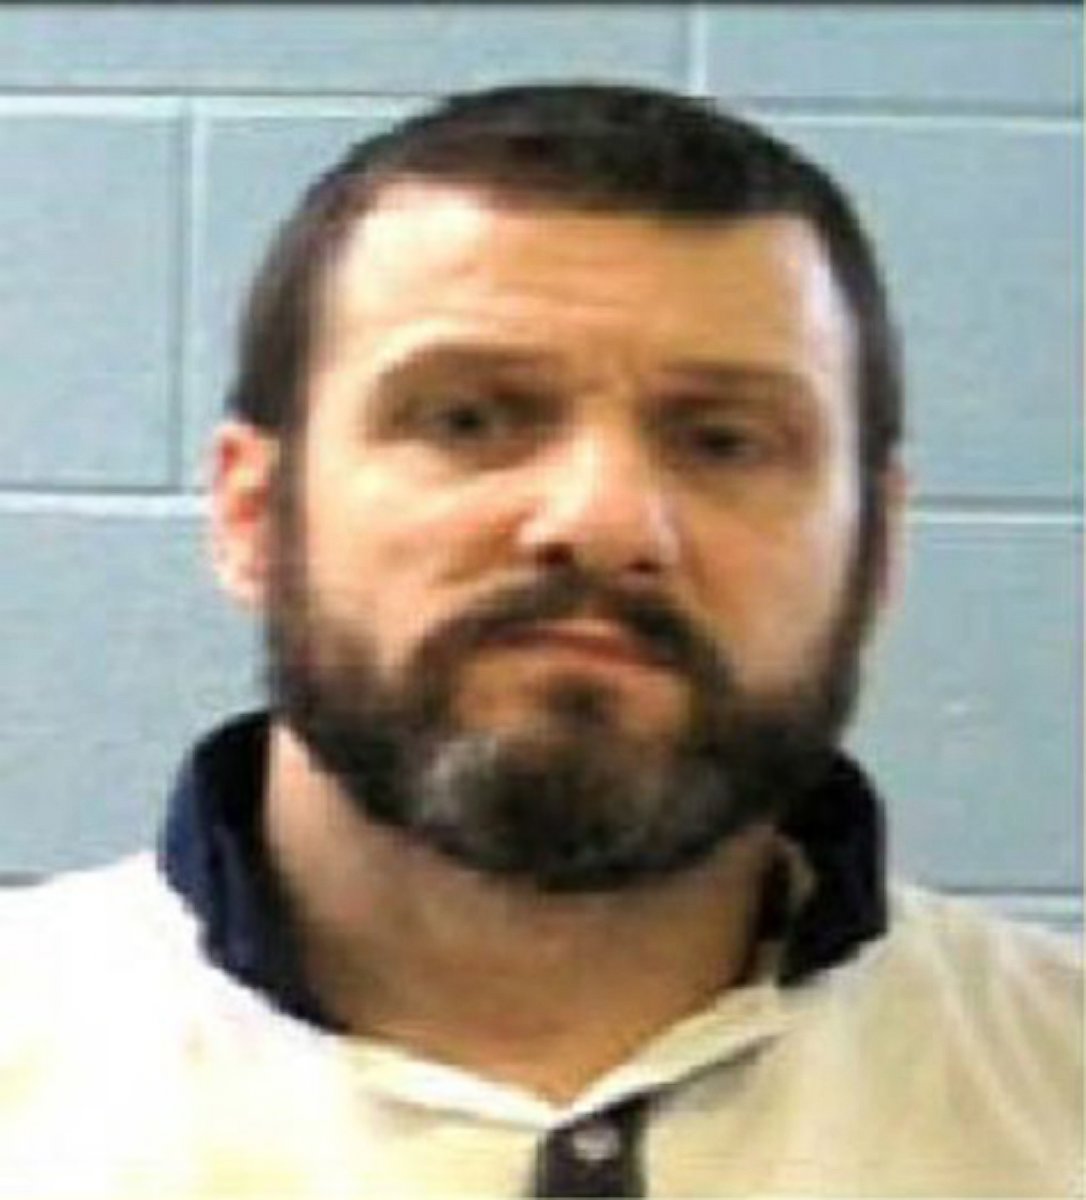 PHOTO: A handout photo provided by Georgia Corrections of 43-year-old Donnie Russell Rowe who is being sought by authorities in Georgia along with another prisoner, Ricky DuBose, in Putnam County, Ga., June 13, 2017.